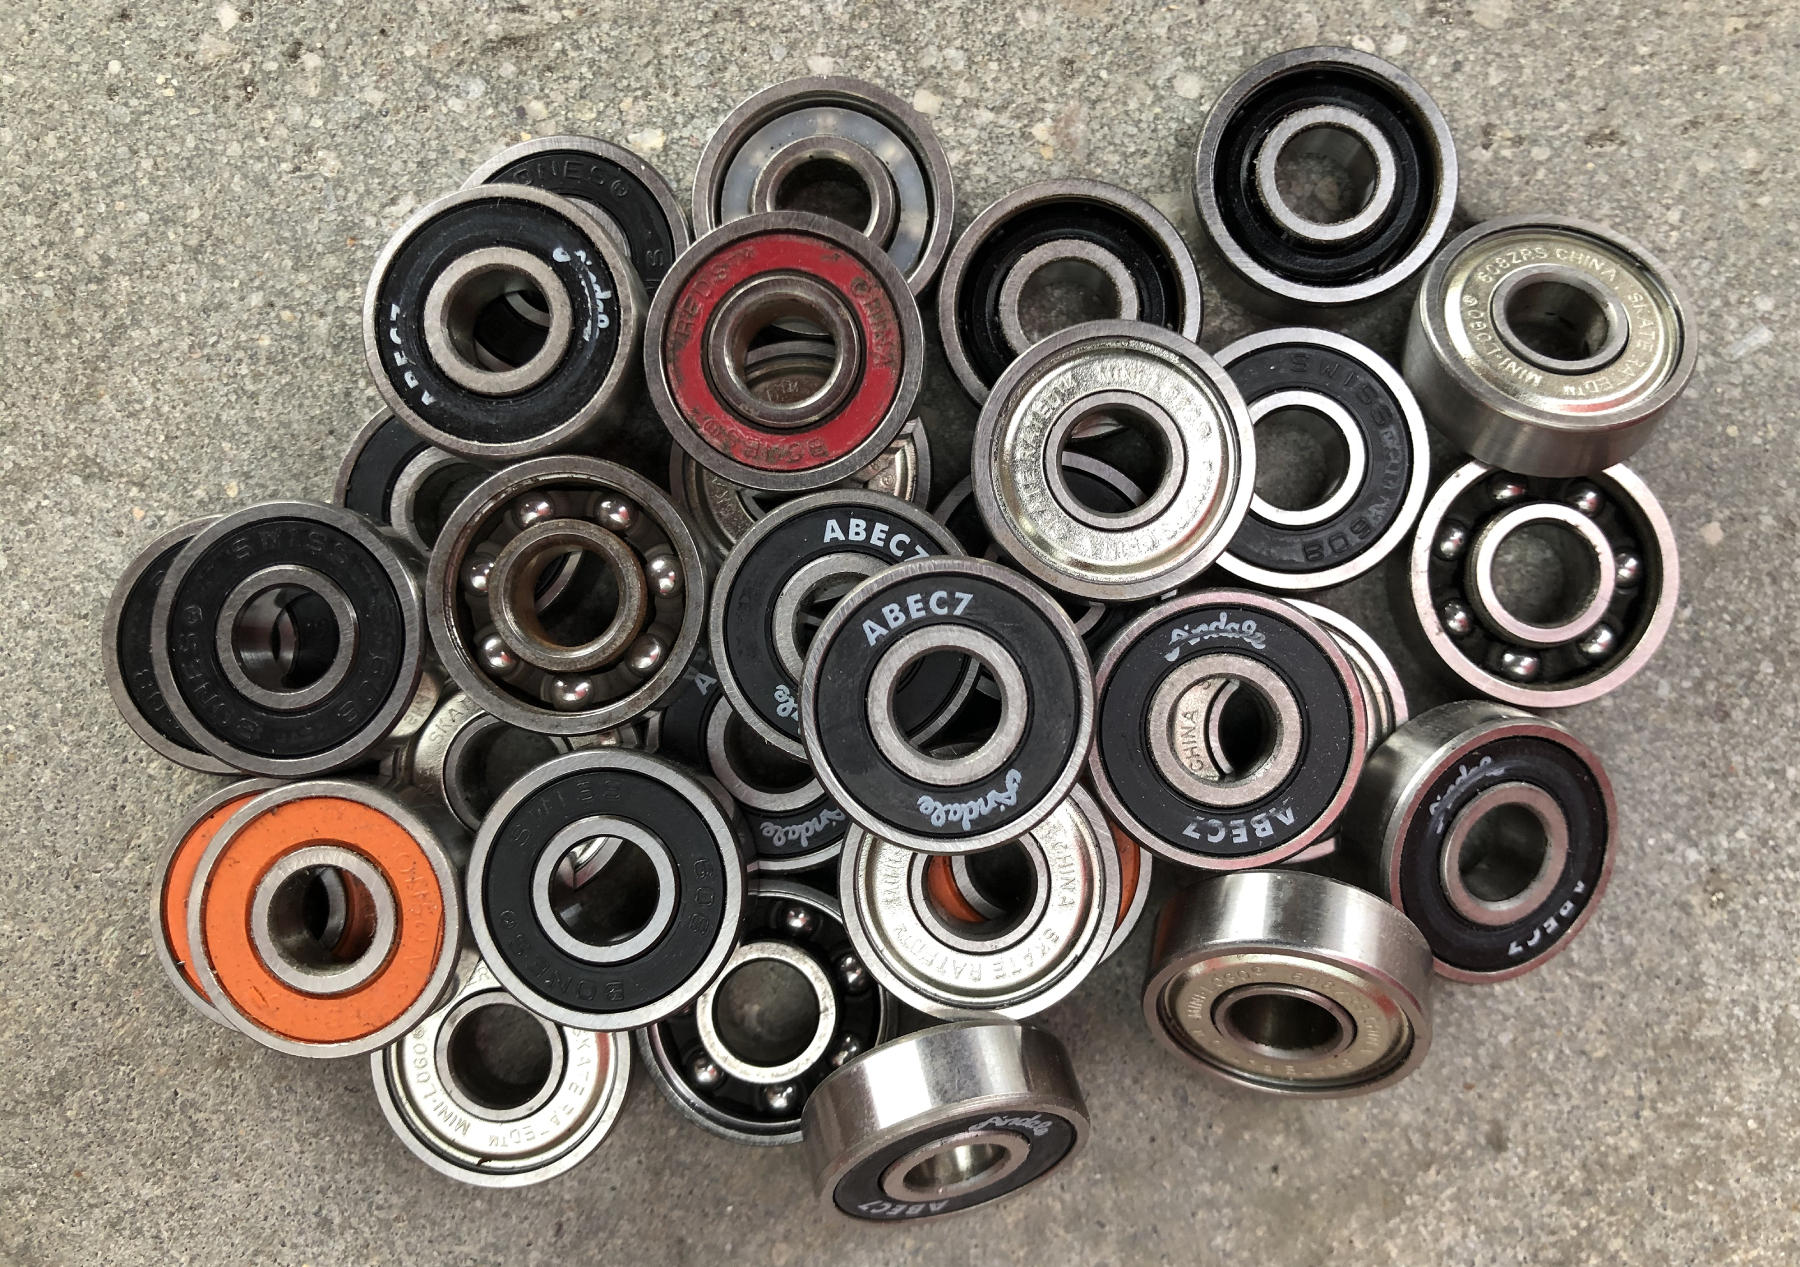 1 Pcs Skateboard Longboard Bearings Precision ABEC 9 with Spacers & Washers 